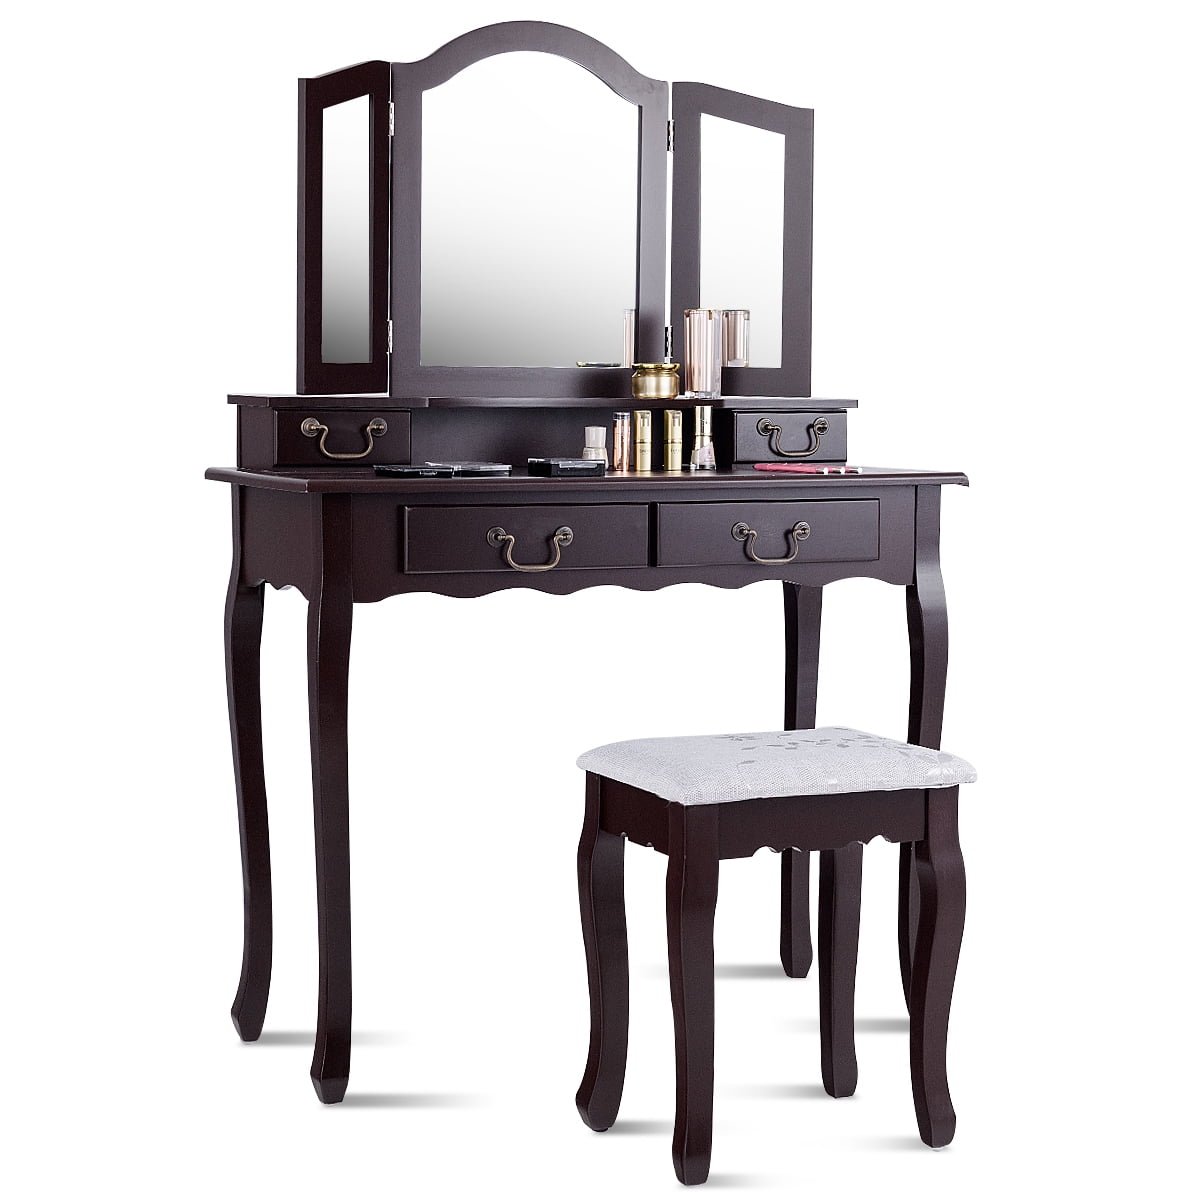 Topbuy 2 In 1 Vanity Table Set W Tri Fold Mirror Drawers Andpadded Stool